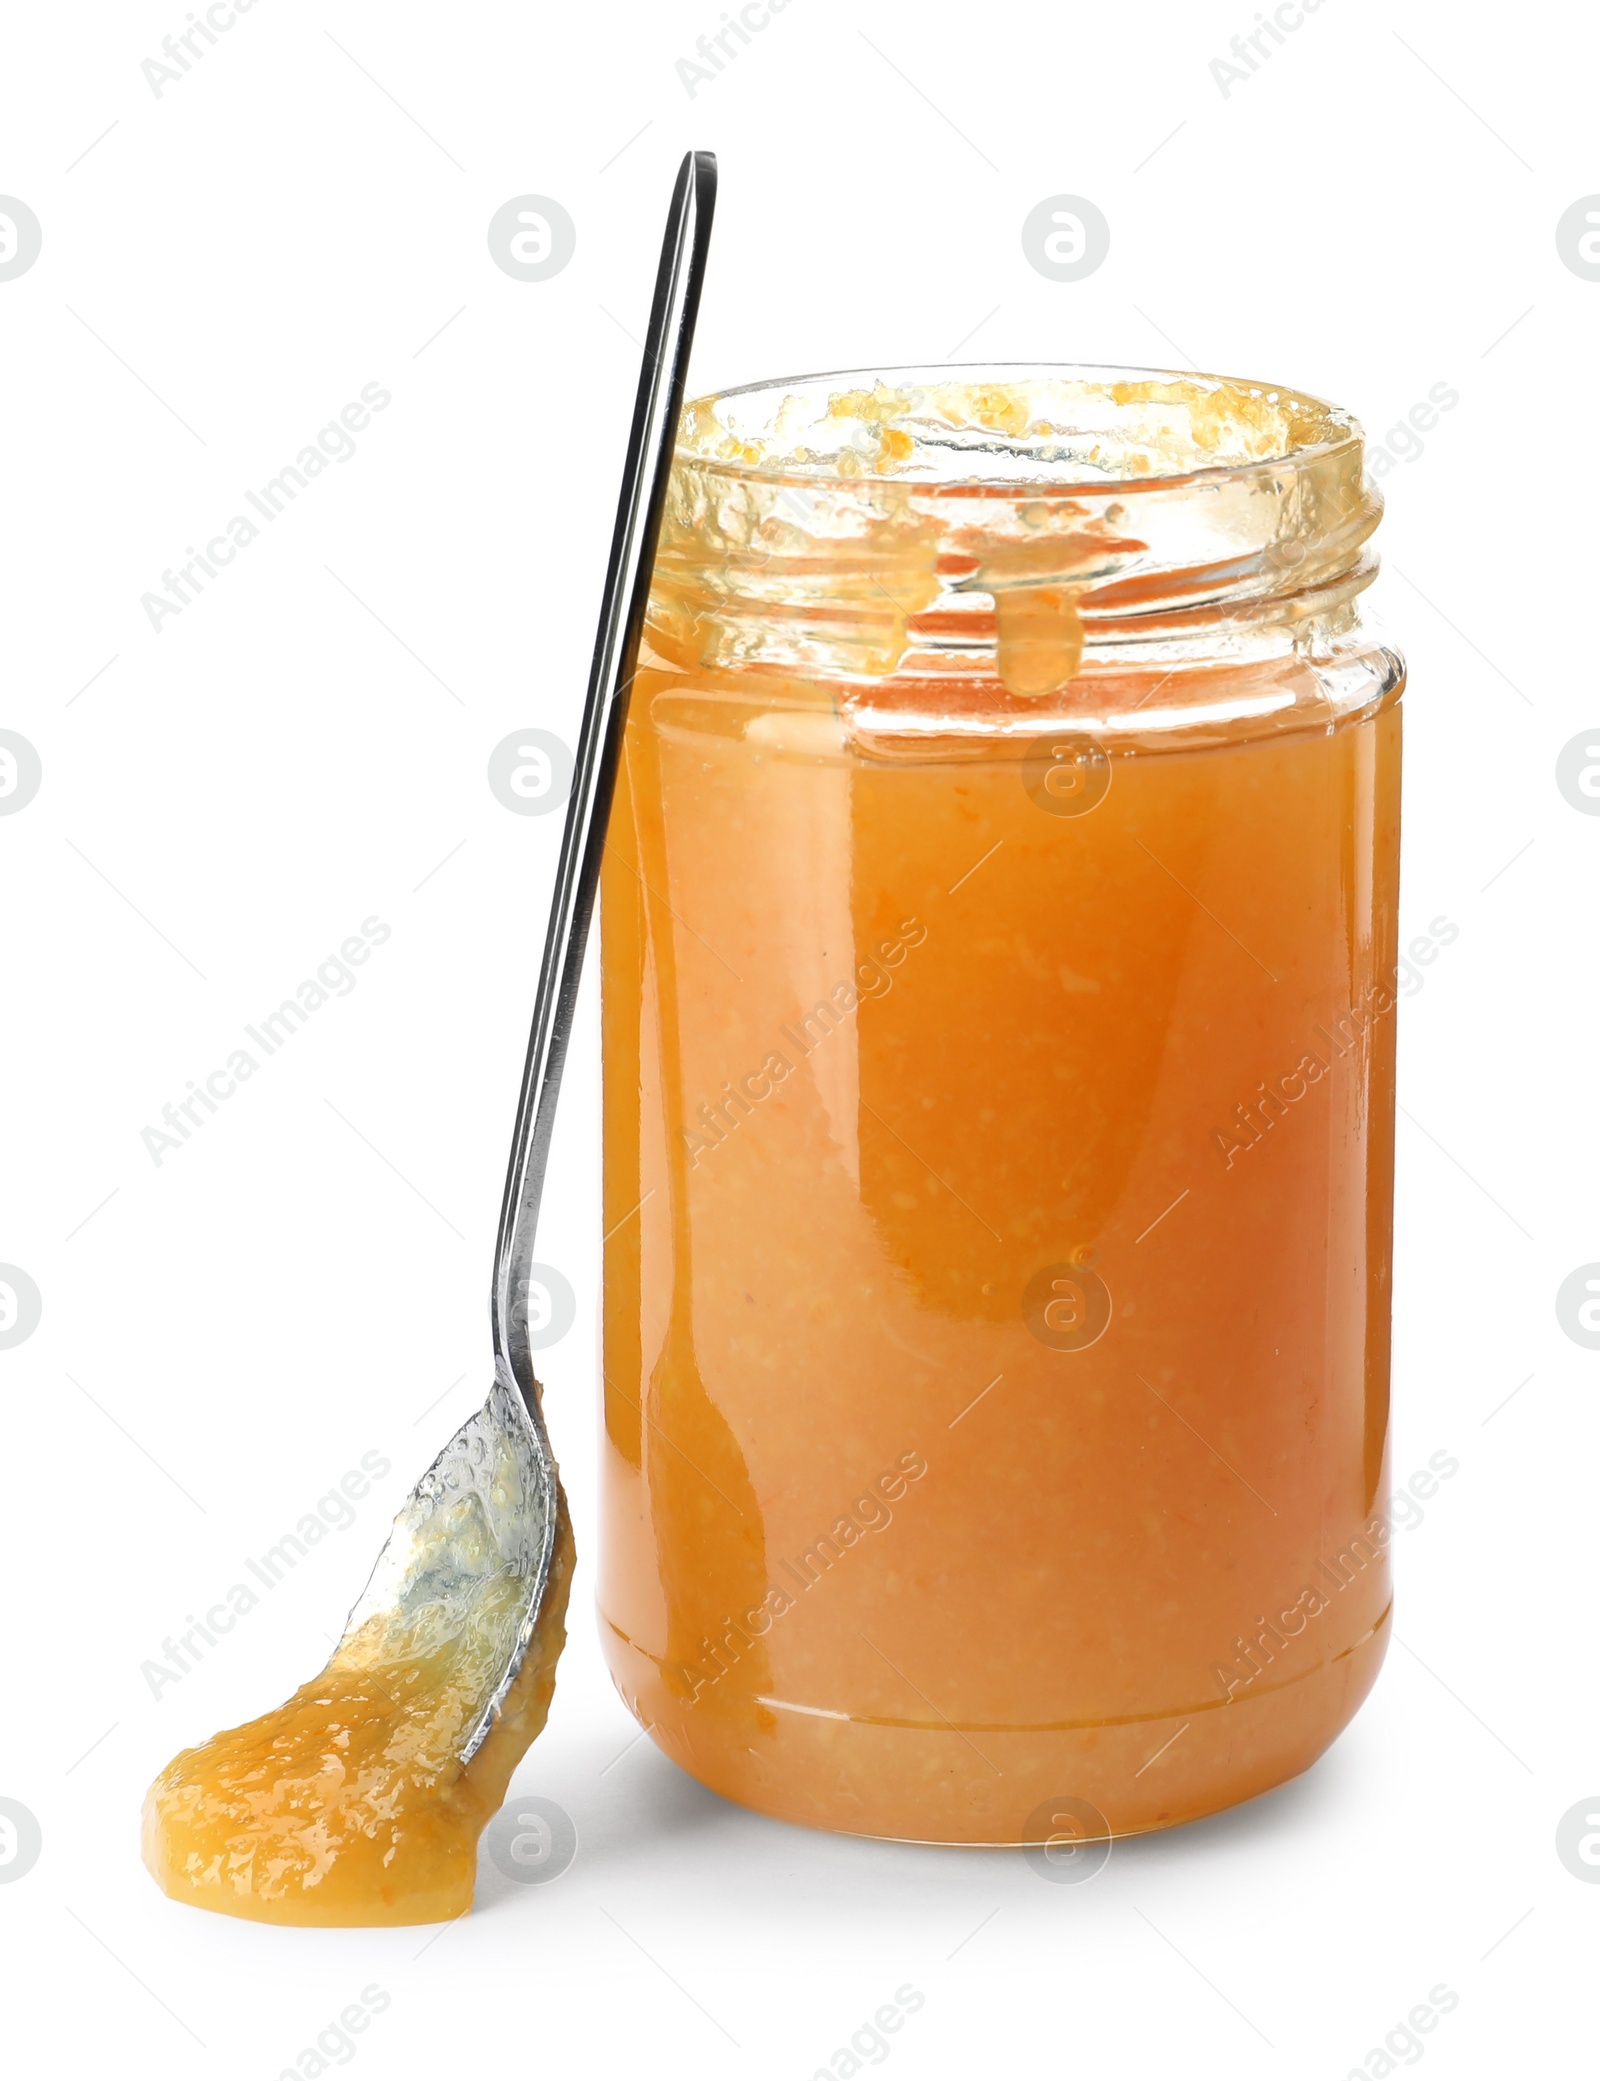 Photo of Jar of delicious orange marmalade with spoon on white background